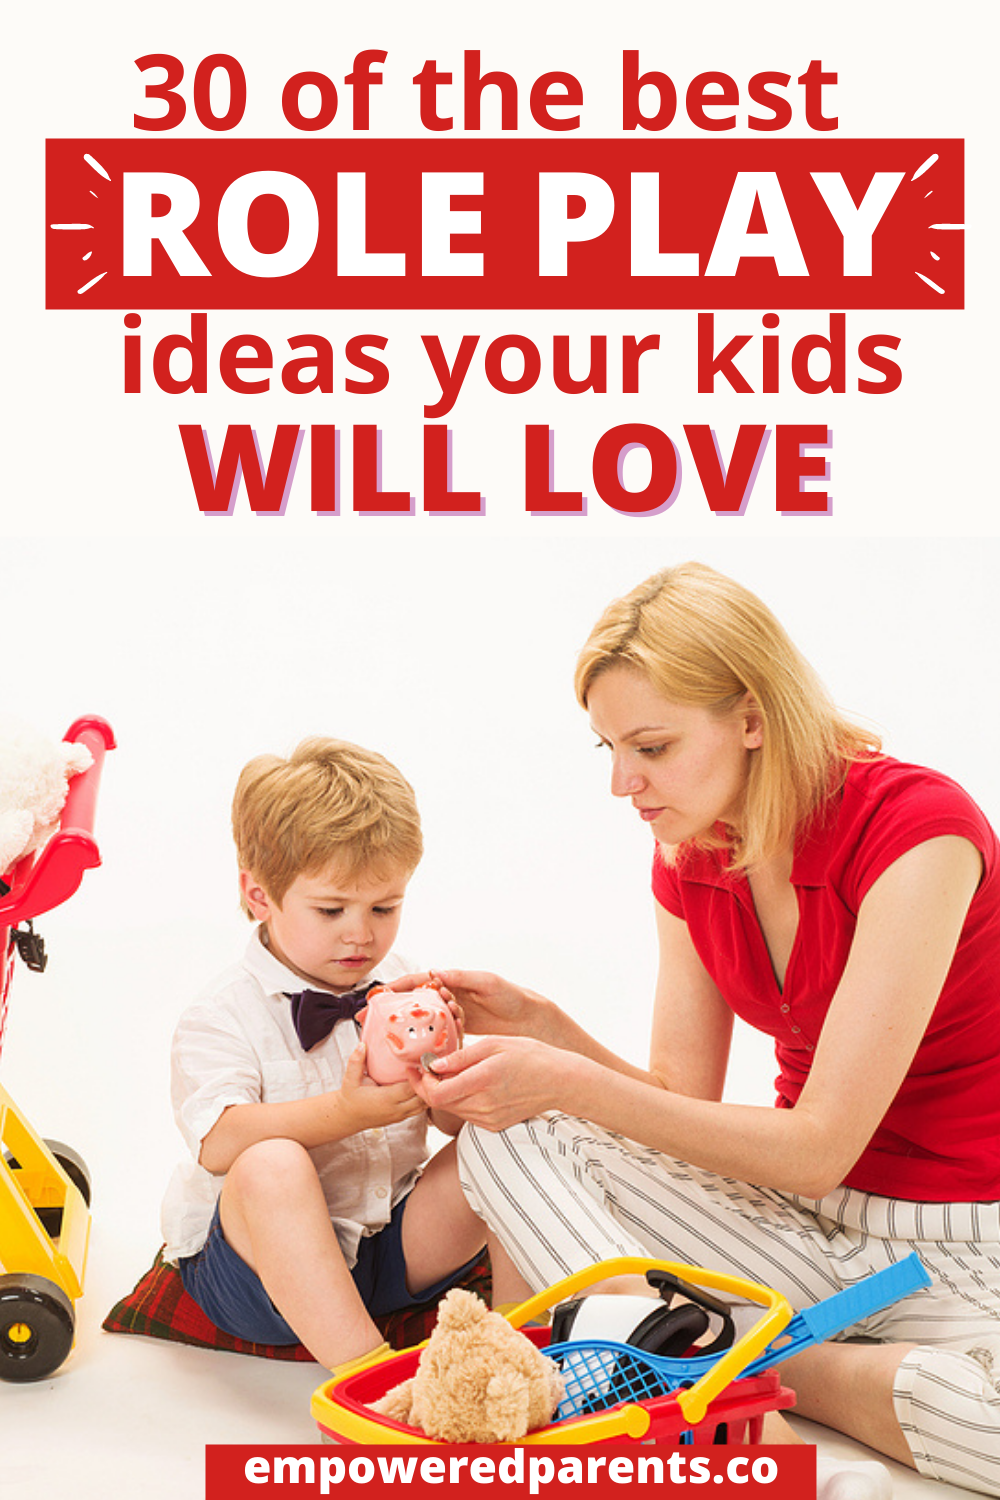 30 of the best role play ideas your kids will love pinterest image